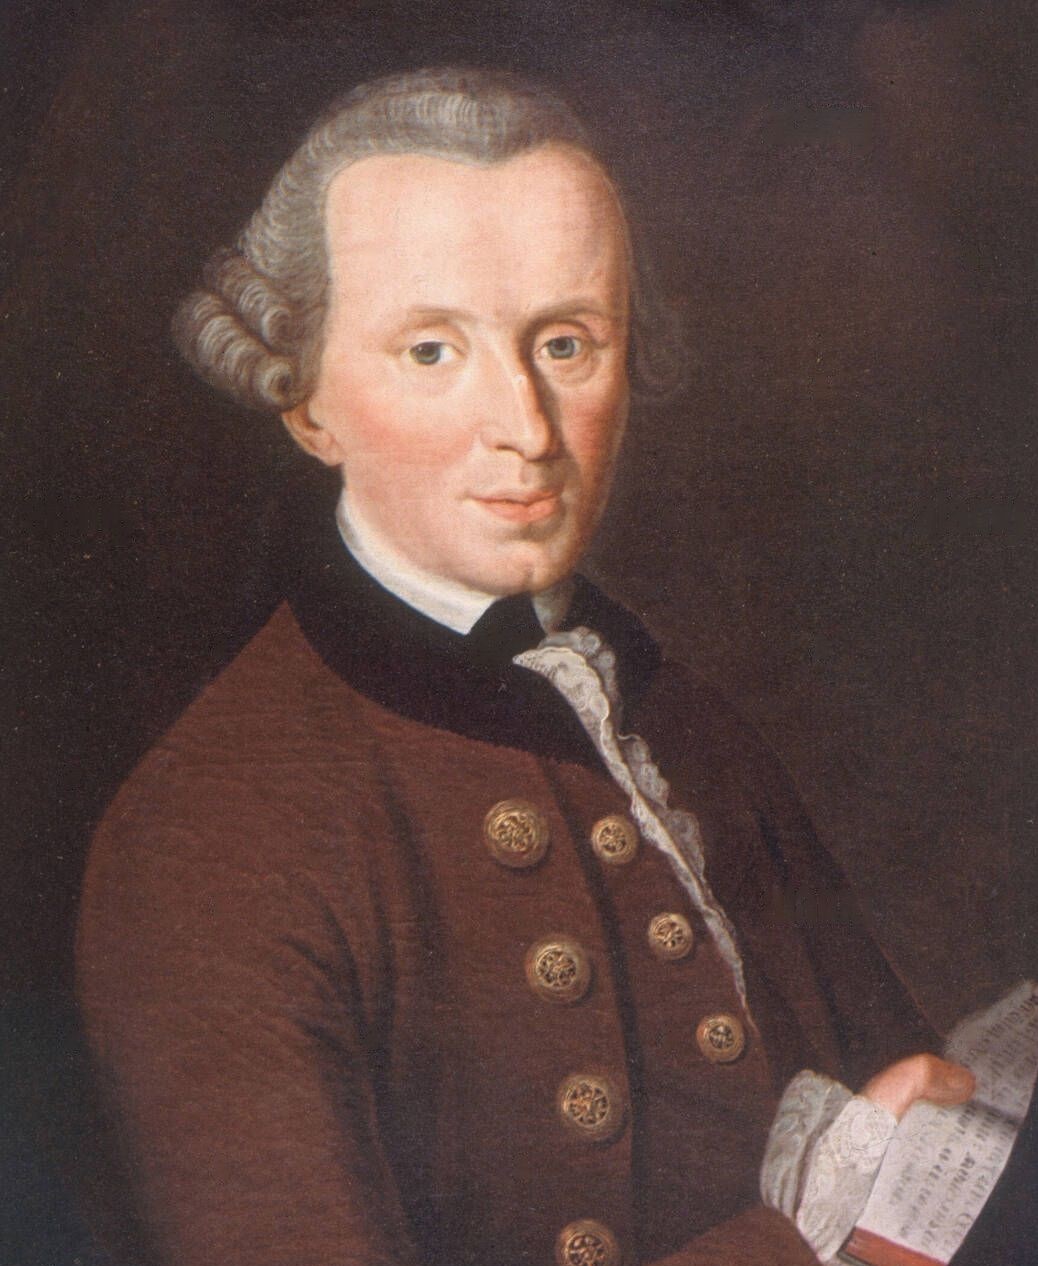 Immanuel Kant  - The German philosopher with an IQ of 175